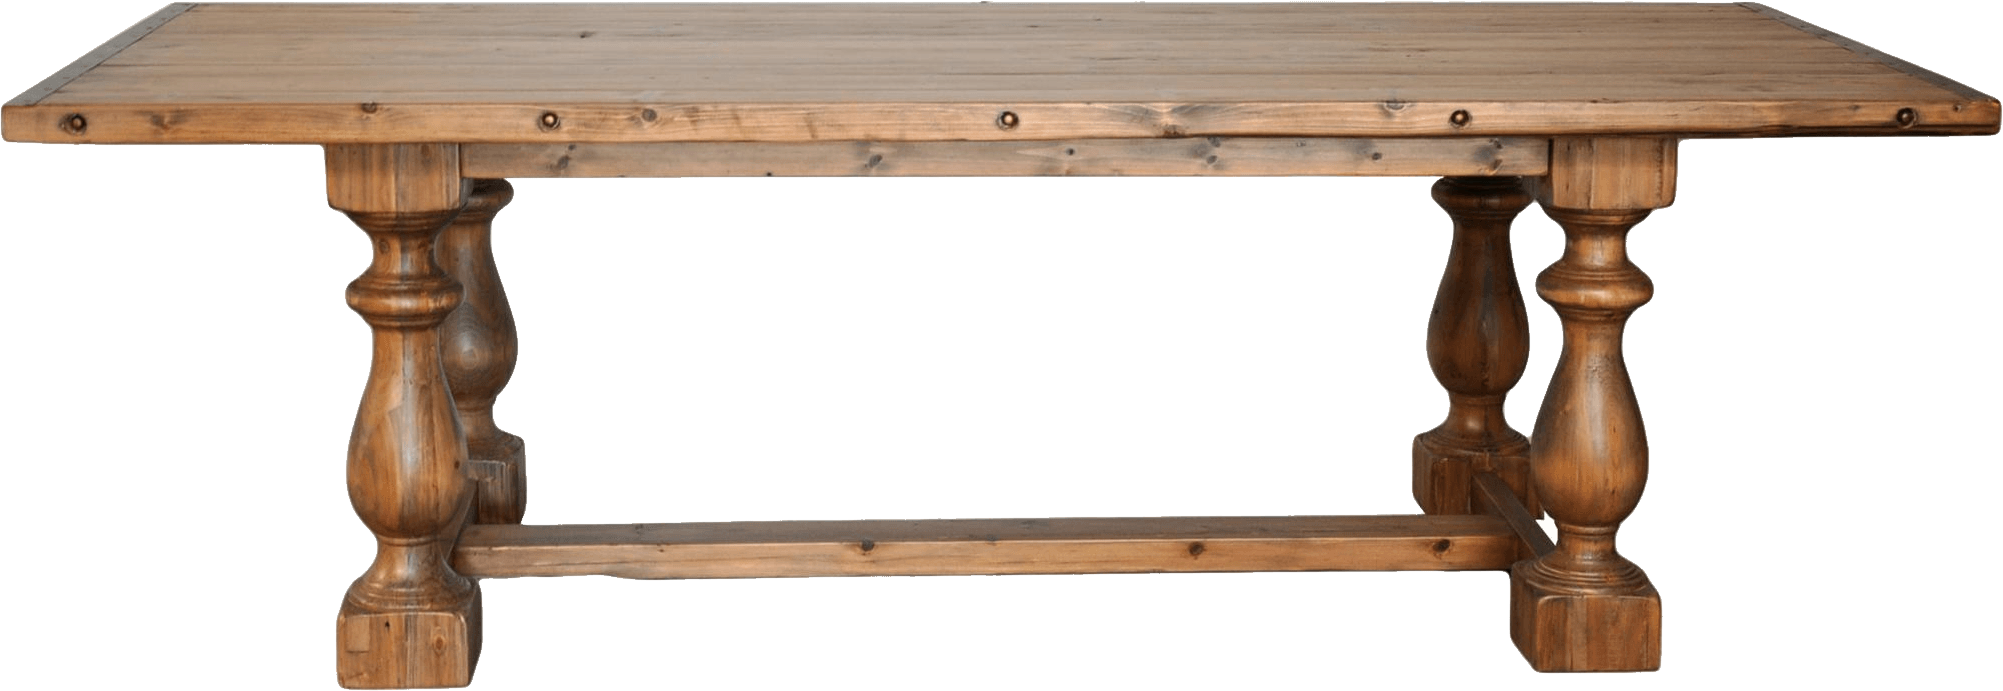 Wooden Table Png Image PNG Image